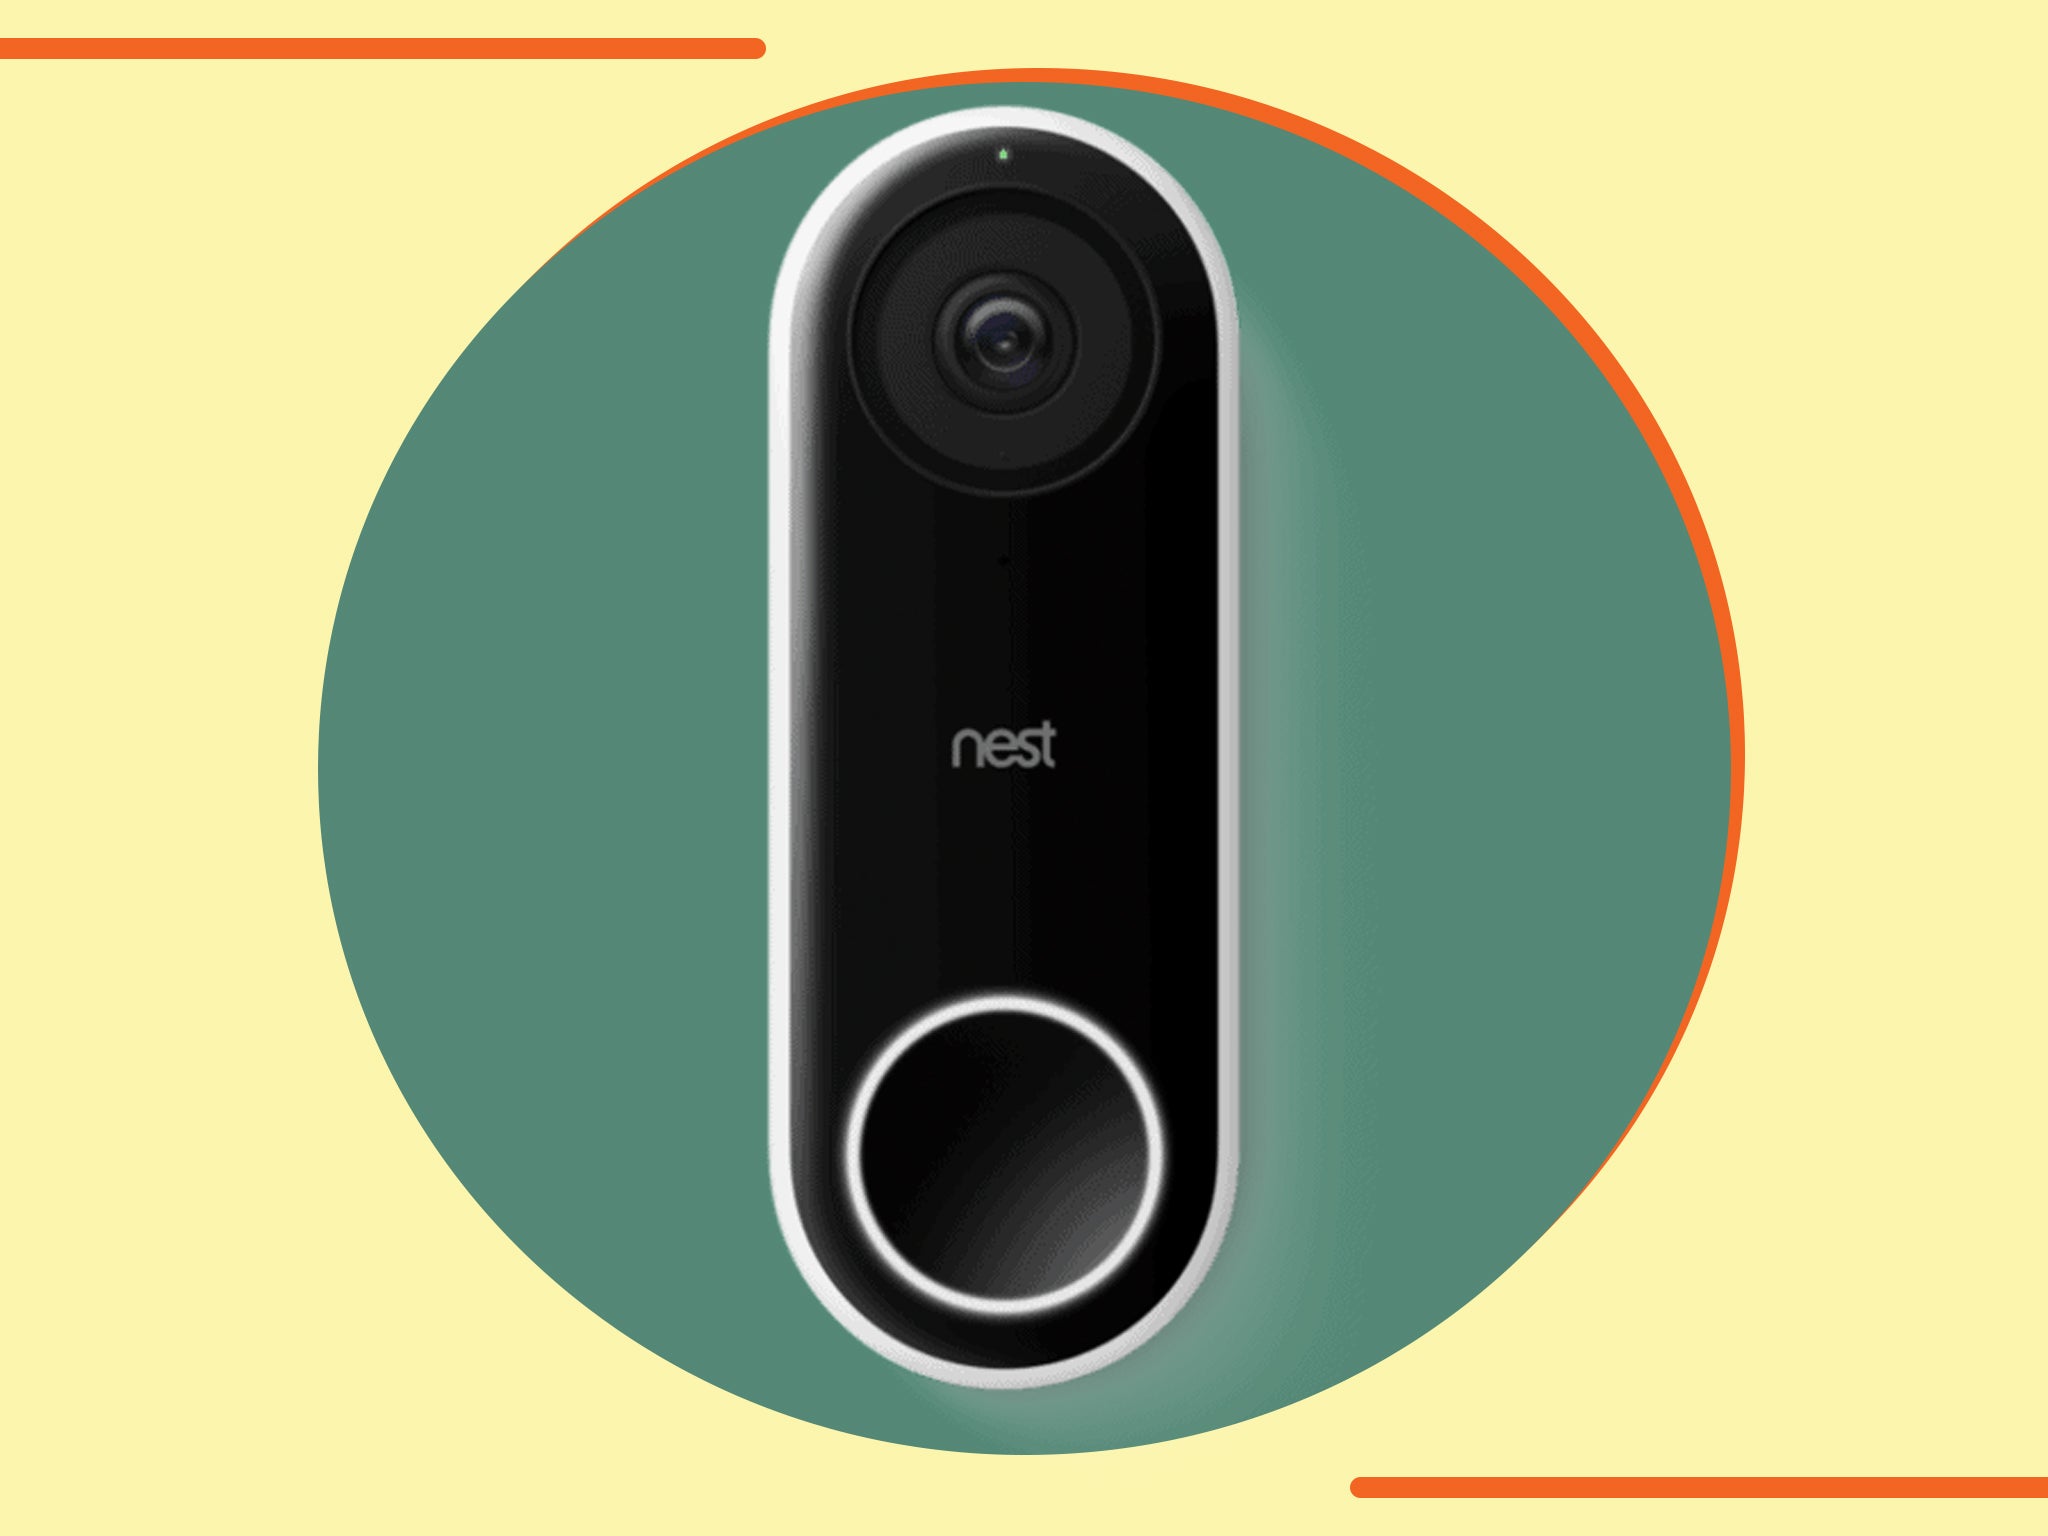 Google acquiring Nest in 2014 and has gradually folded the company into its ranks